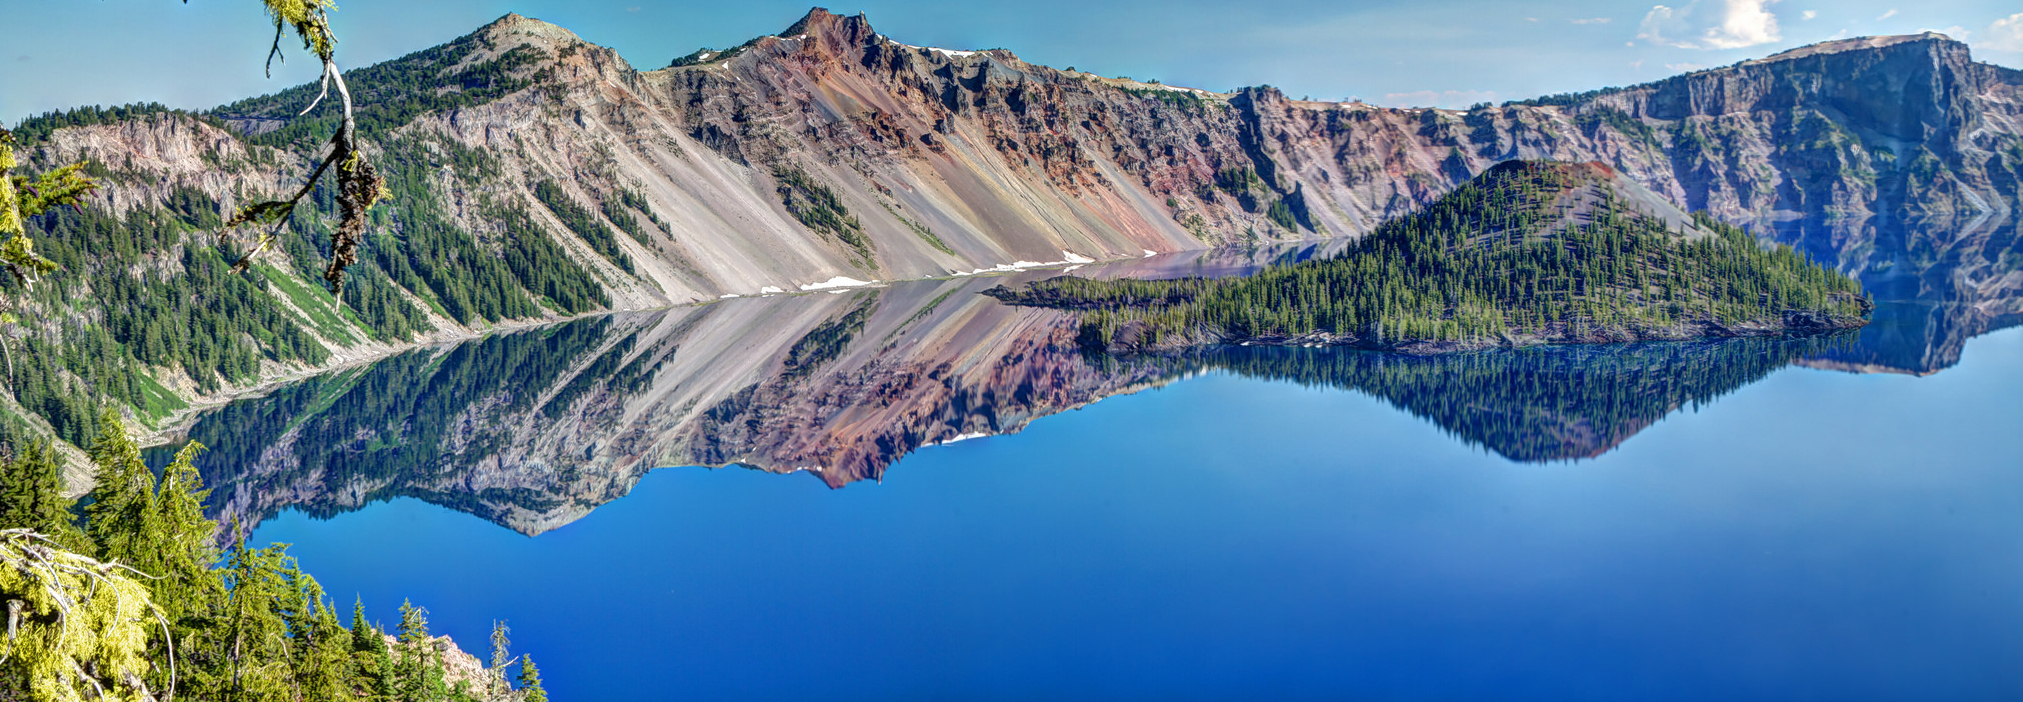 On a clear, still day Crater Lake’s deep blue reflective water is mesmerizing. Photo by Scott Smithson via Flickr.